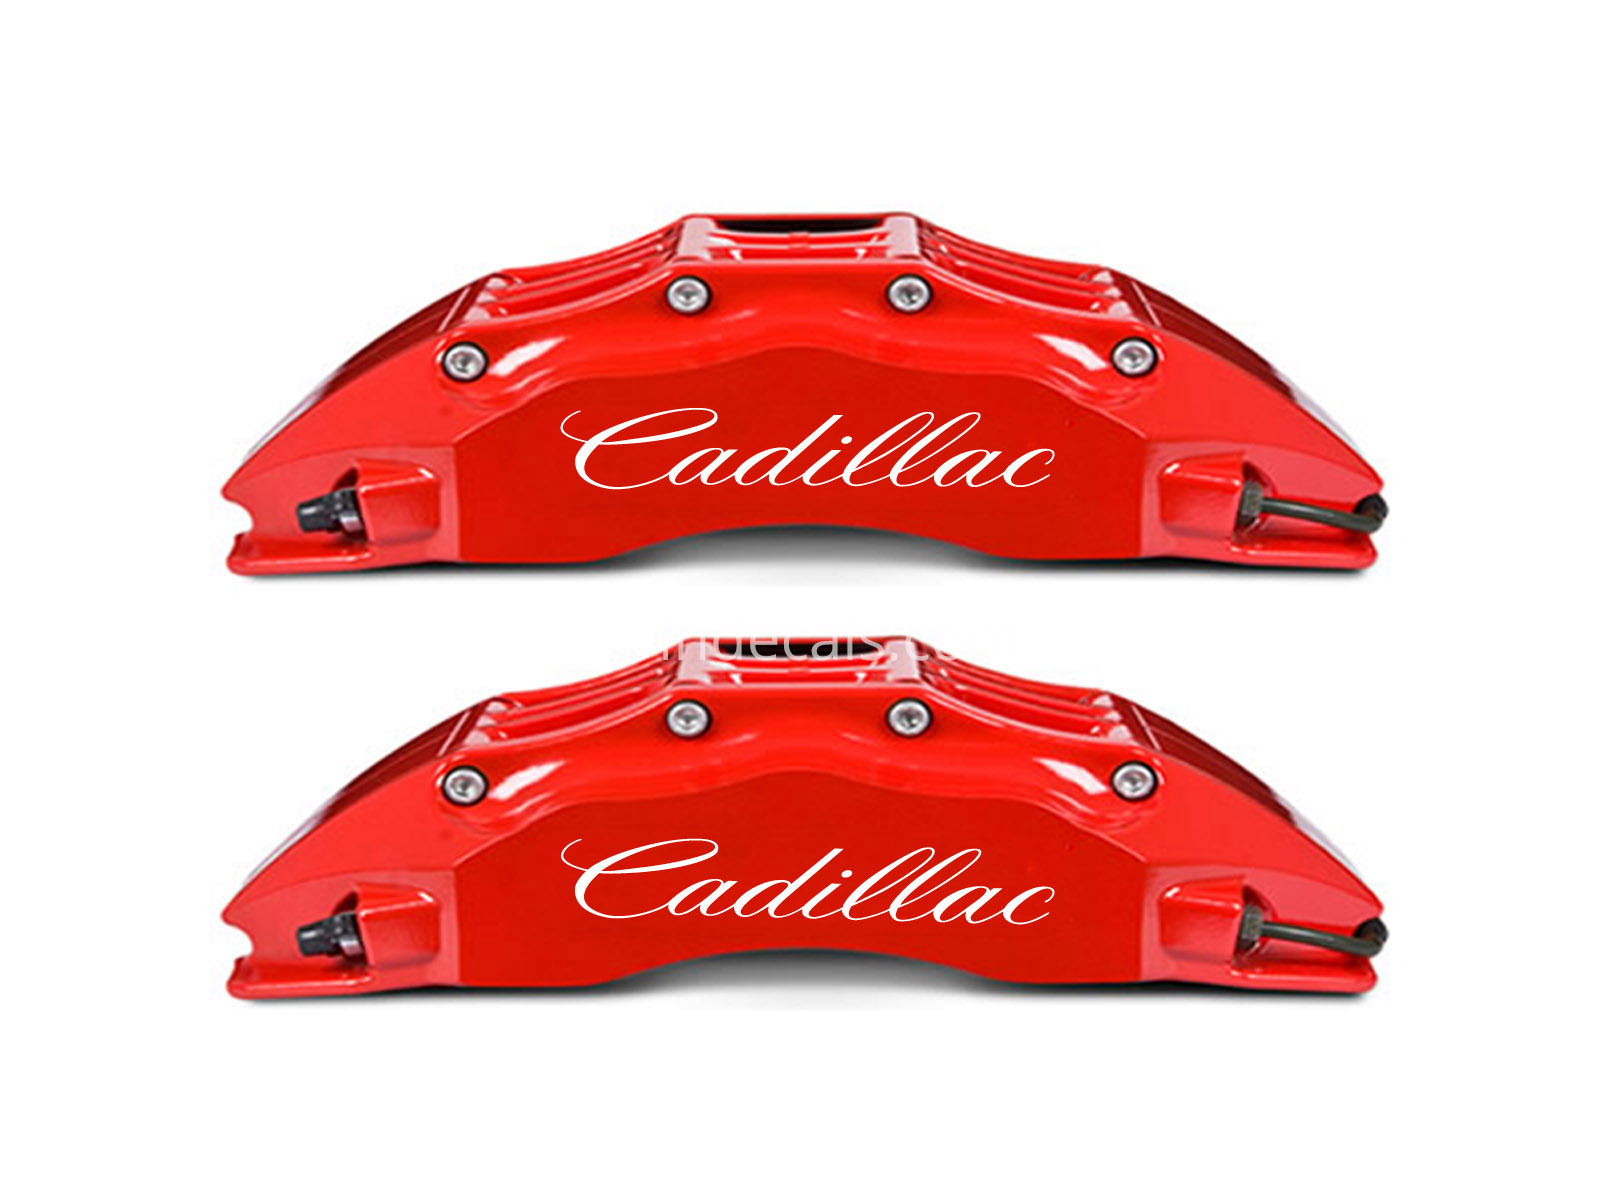 6 x Cadillac Stickers for Brakes - White